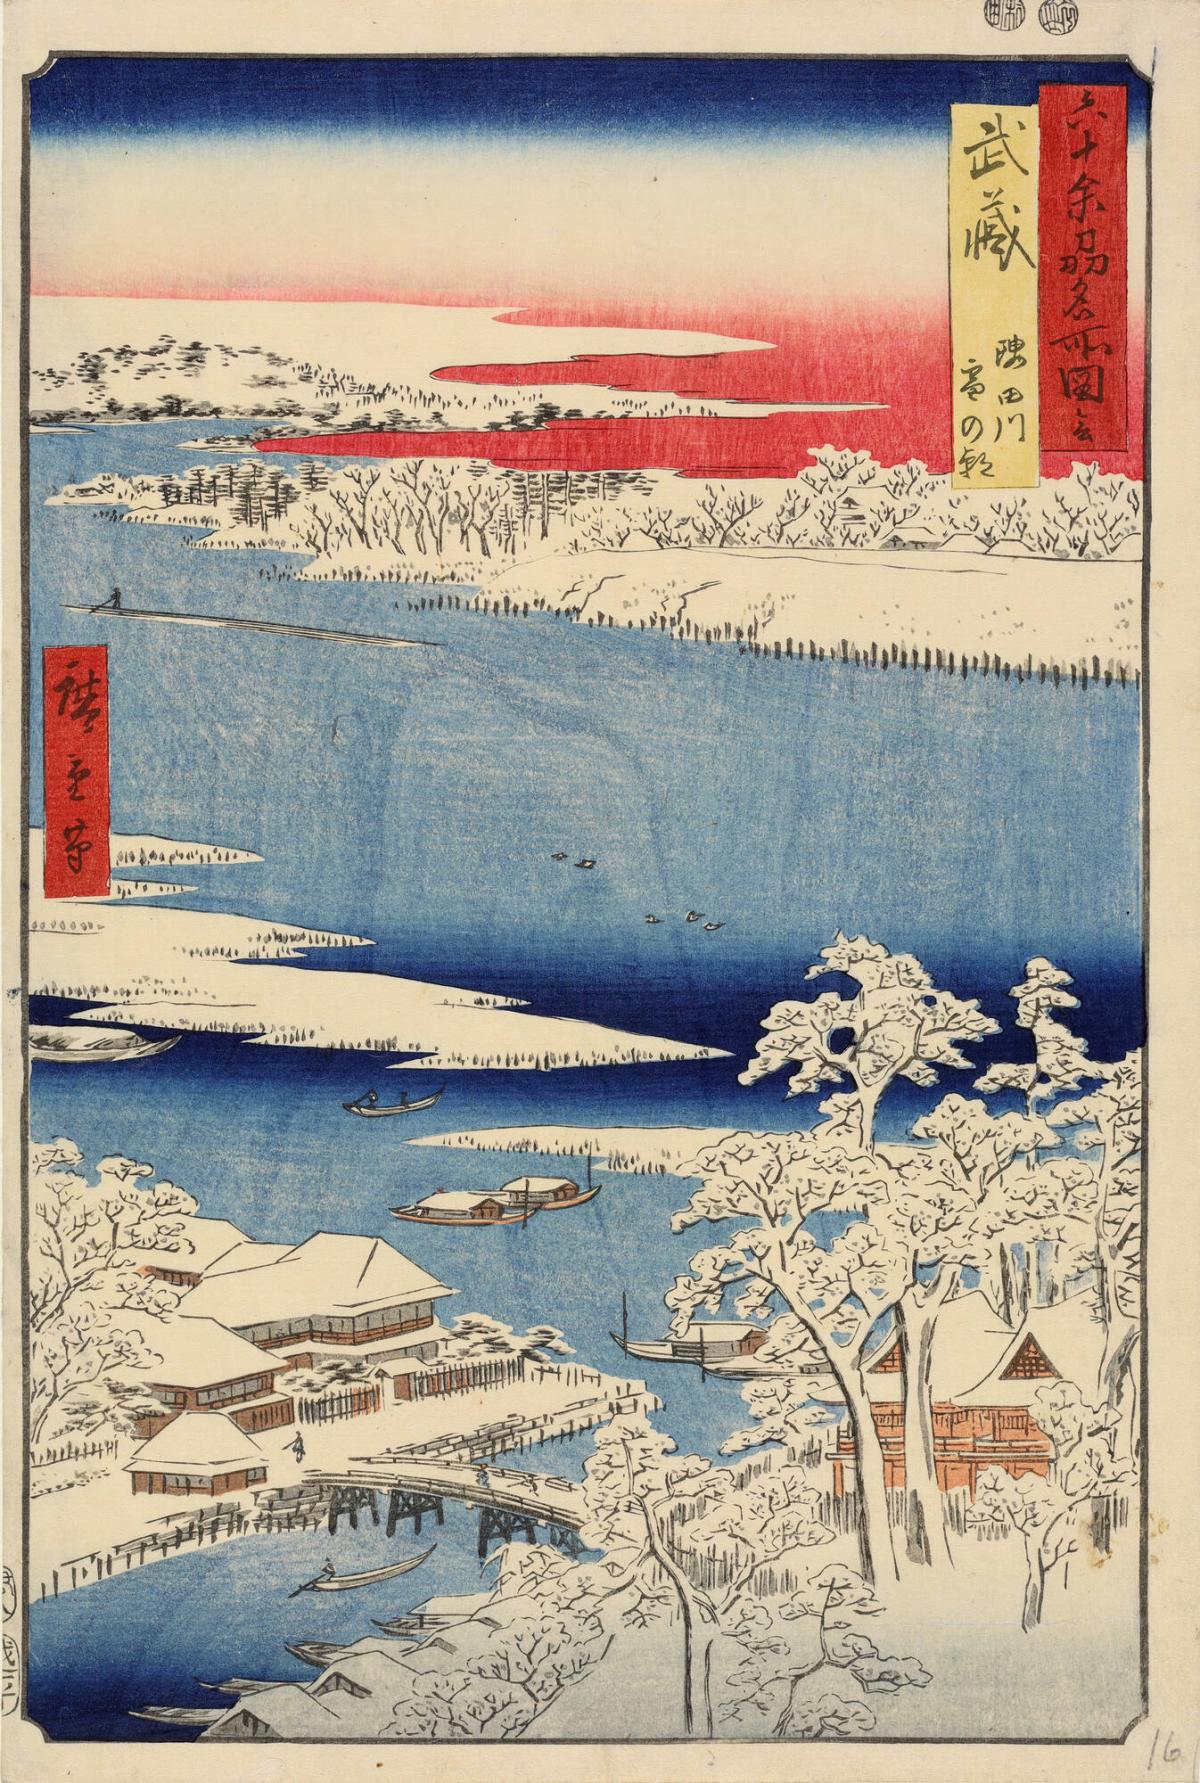 Snowy Morning on the Sumida River in Musashi Province, from the series Pictures of Famous Places in the Sixty-odd Provinces